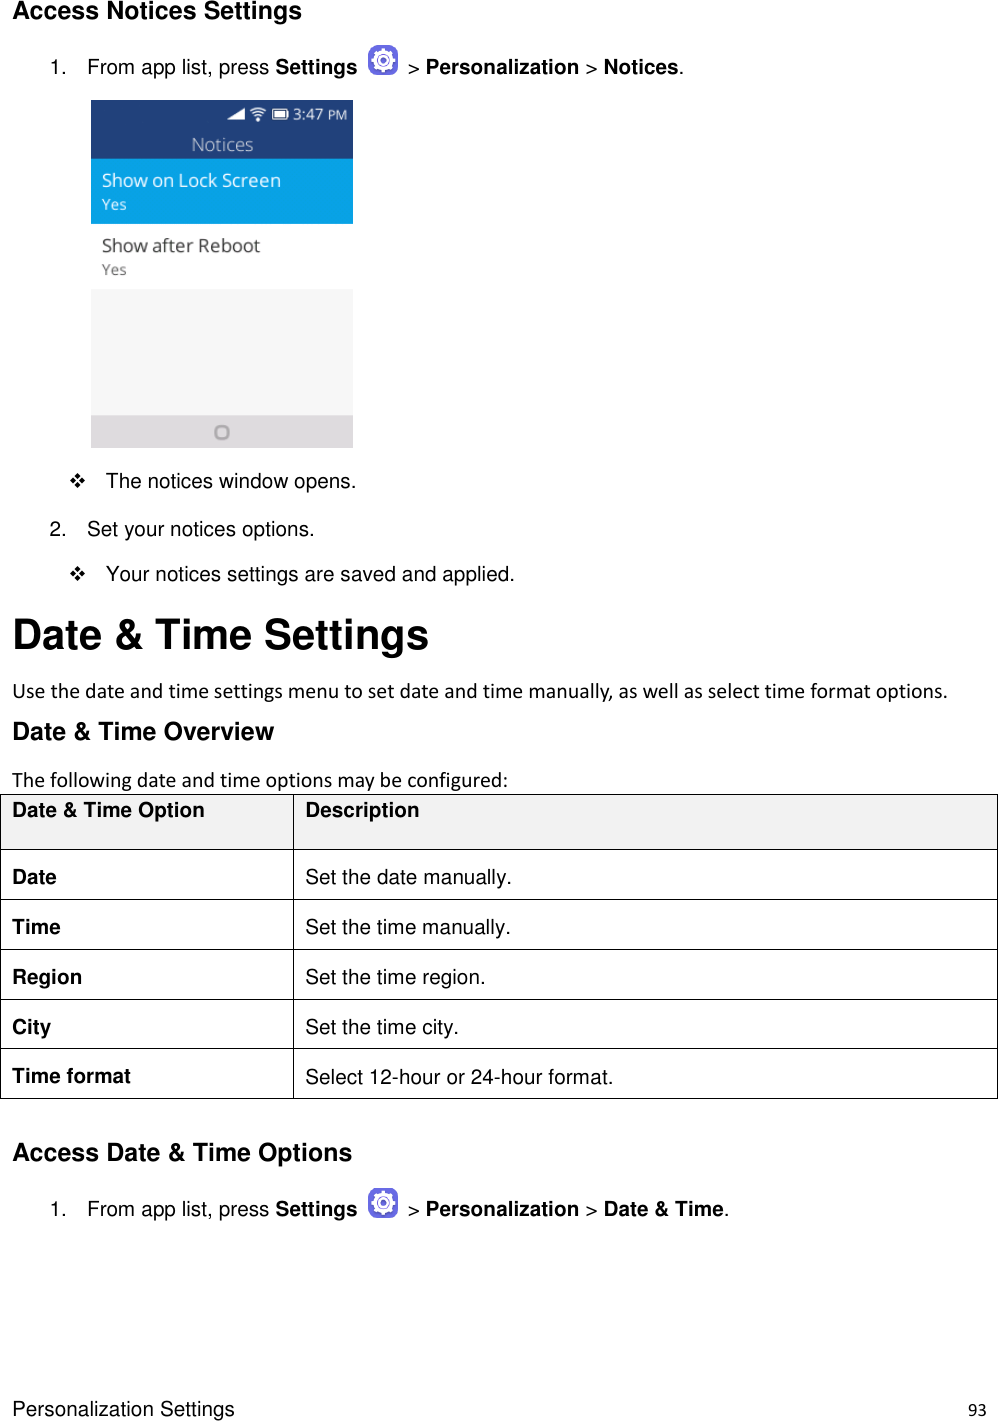 Personalization Settings    93 Access Notices Settings 1.  From app list, press Settings    &gt; Personalization &gt; Notices.            The notices window opens. 2.  Set your notices options.   Your notices settings are saved and applied. Date &amp; Time Settings Use the date and time settings menu to set date and time manually, as well as select time format options. Date &amp; Time Overview The following date and time options may be configured:   Date &amp; Time Option Description Date Set the date manually. Time Set the time manually. Region Set the time region. City Set the time city. Time format Select 12-hour or 24-hour format.  Access Date &amp; Time Options 1.  From app list, press Settings    &gt; Personalization &gt; Date &amp; Time. 